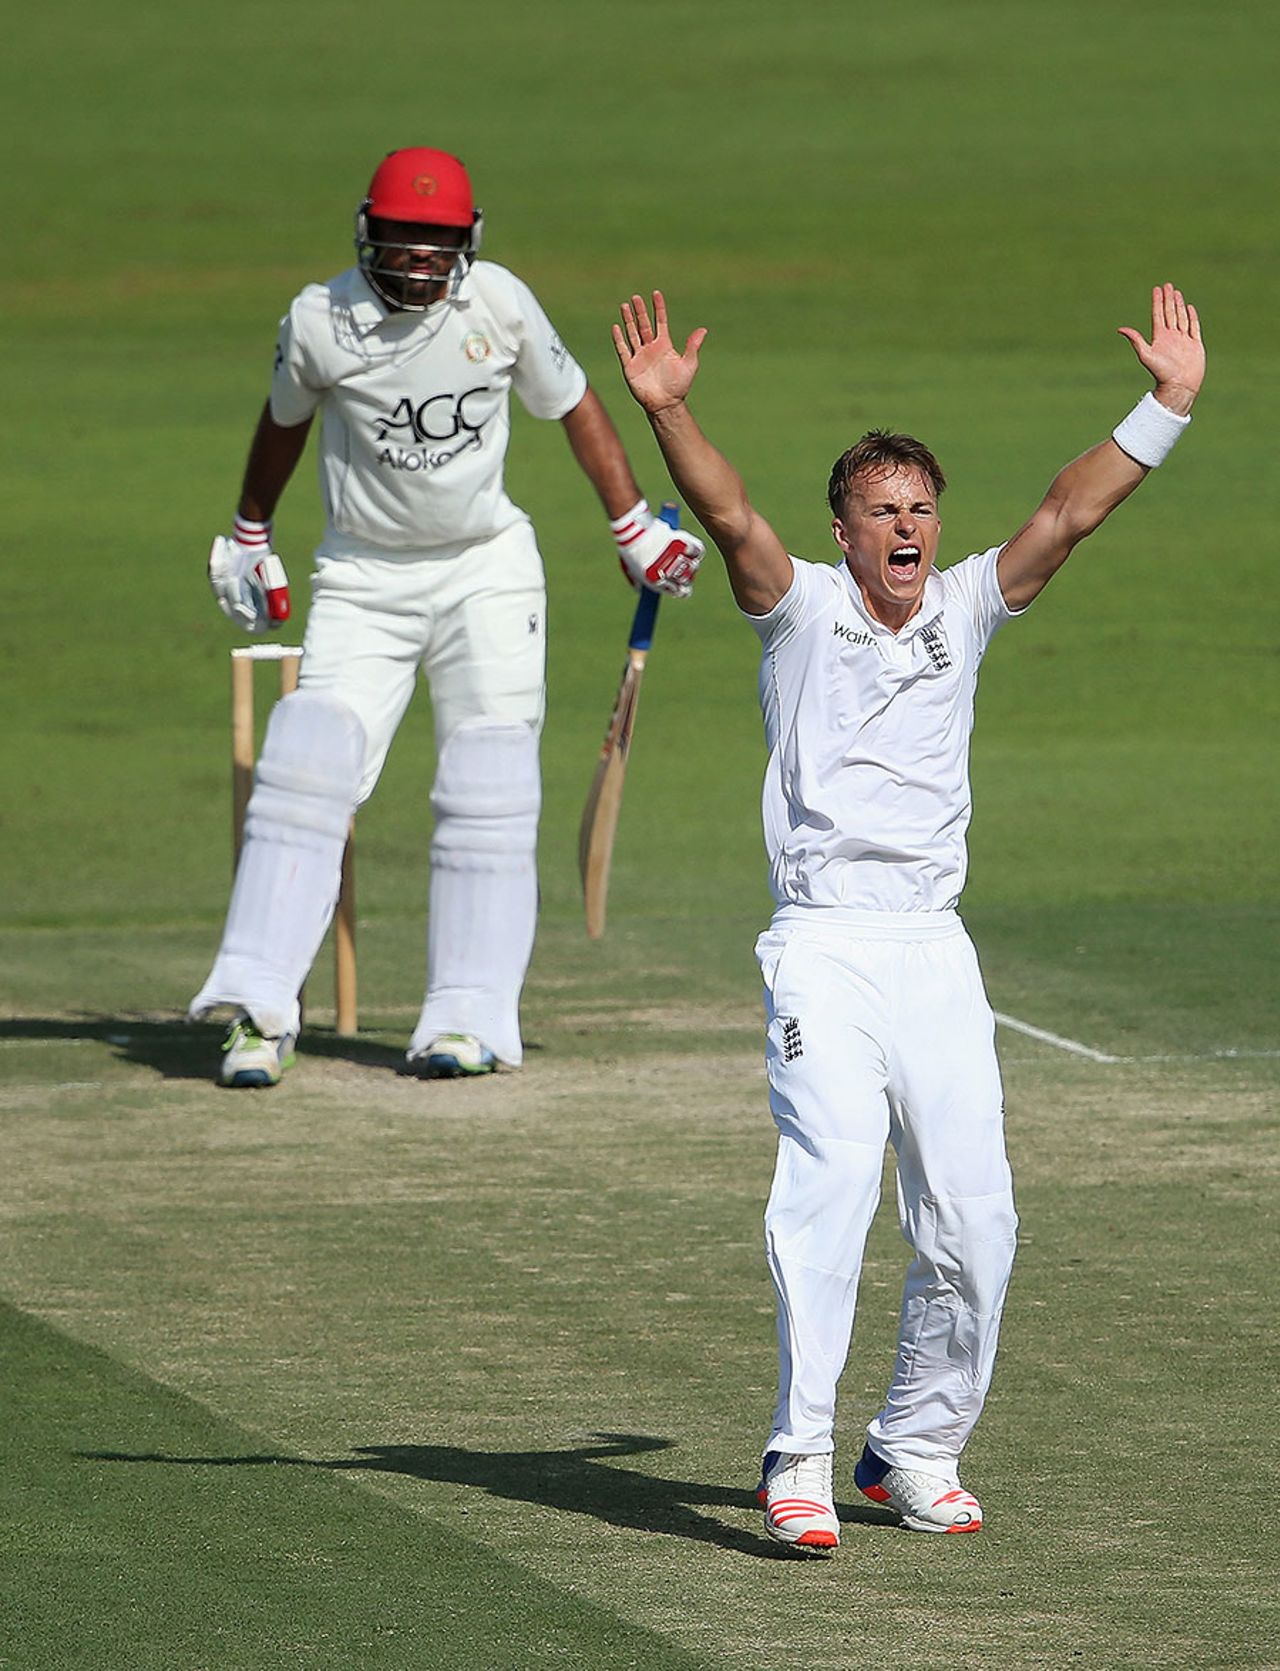 Tom Curran appeals for the wicket of Javed Ahmadi on the second day of the tour match against Afghanistan, Zayed Cricket Stadium, Abu Dhabi, December 8, 2016